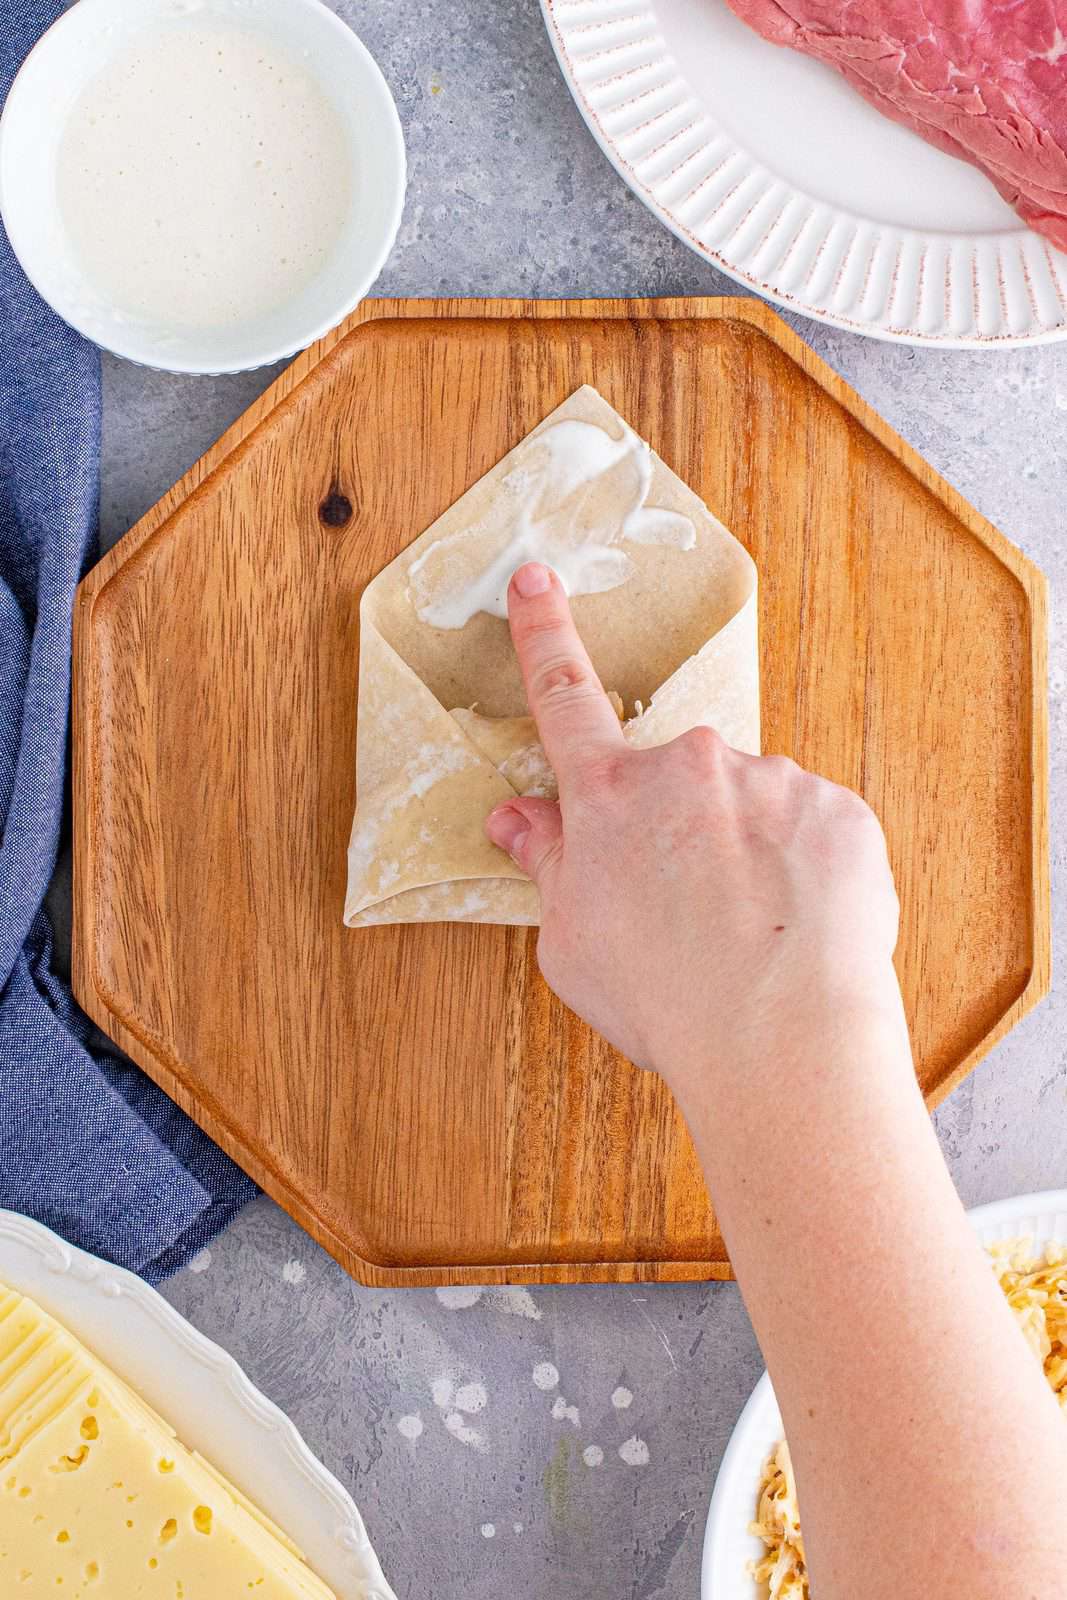 Finger rubbing egg roll wrapper with flour and water mixture.